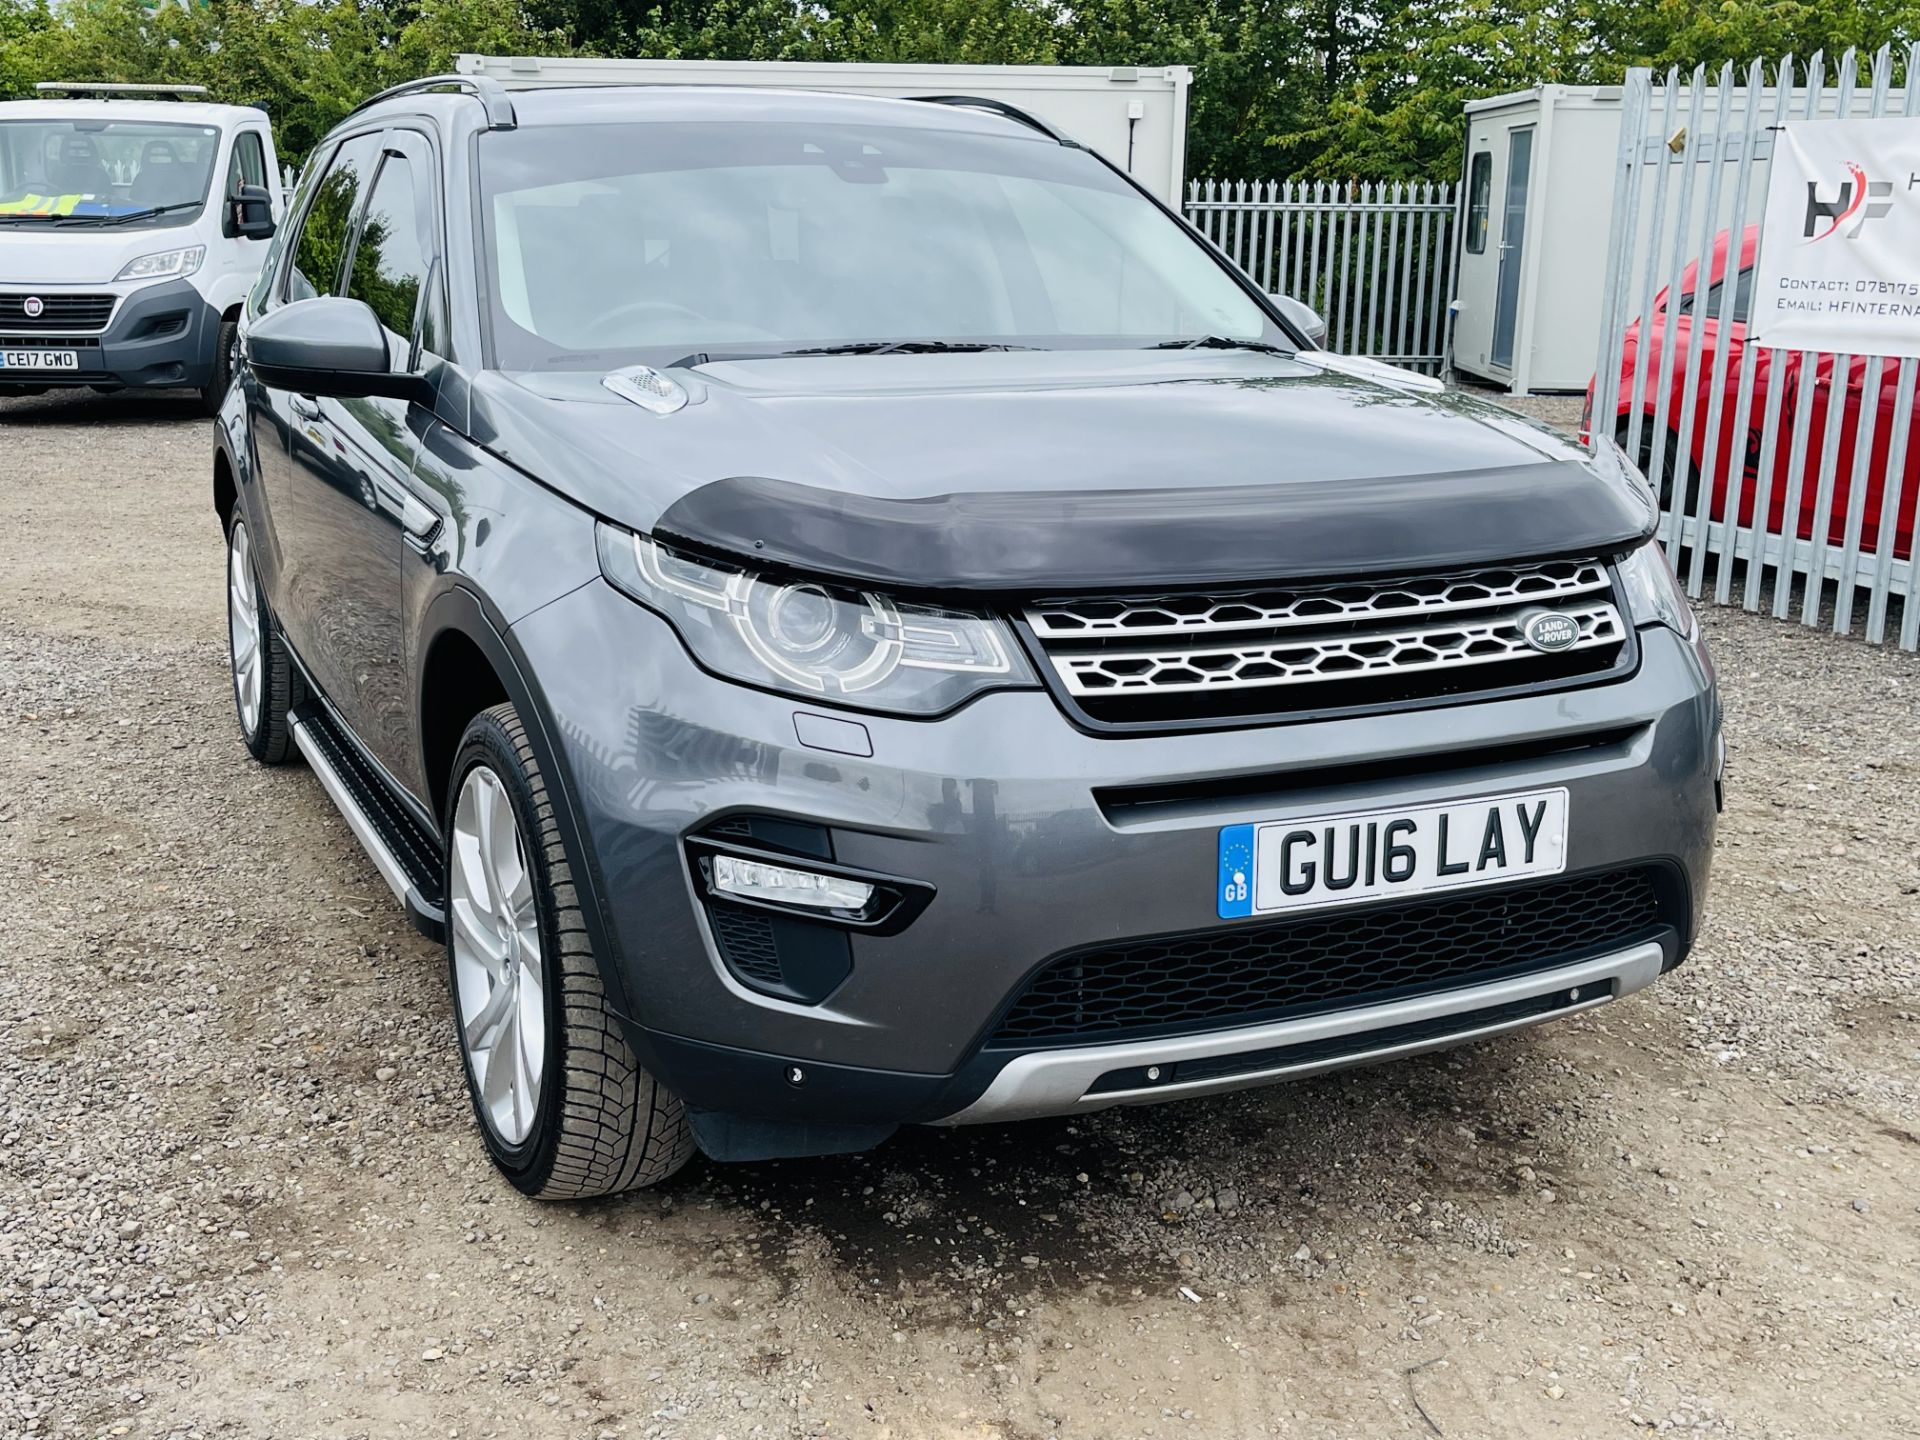 ** ON SALE **Land Rover Discovery sport 2.0 TD4 HSE 2016 '16 Reg' 7 seats - Sat Nav - Euro 6 - - Image 2 of 35